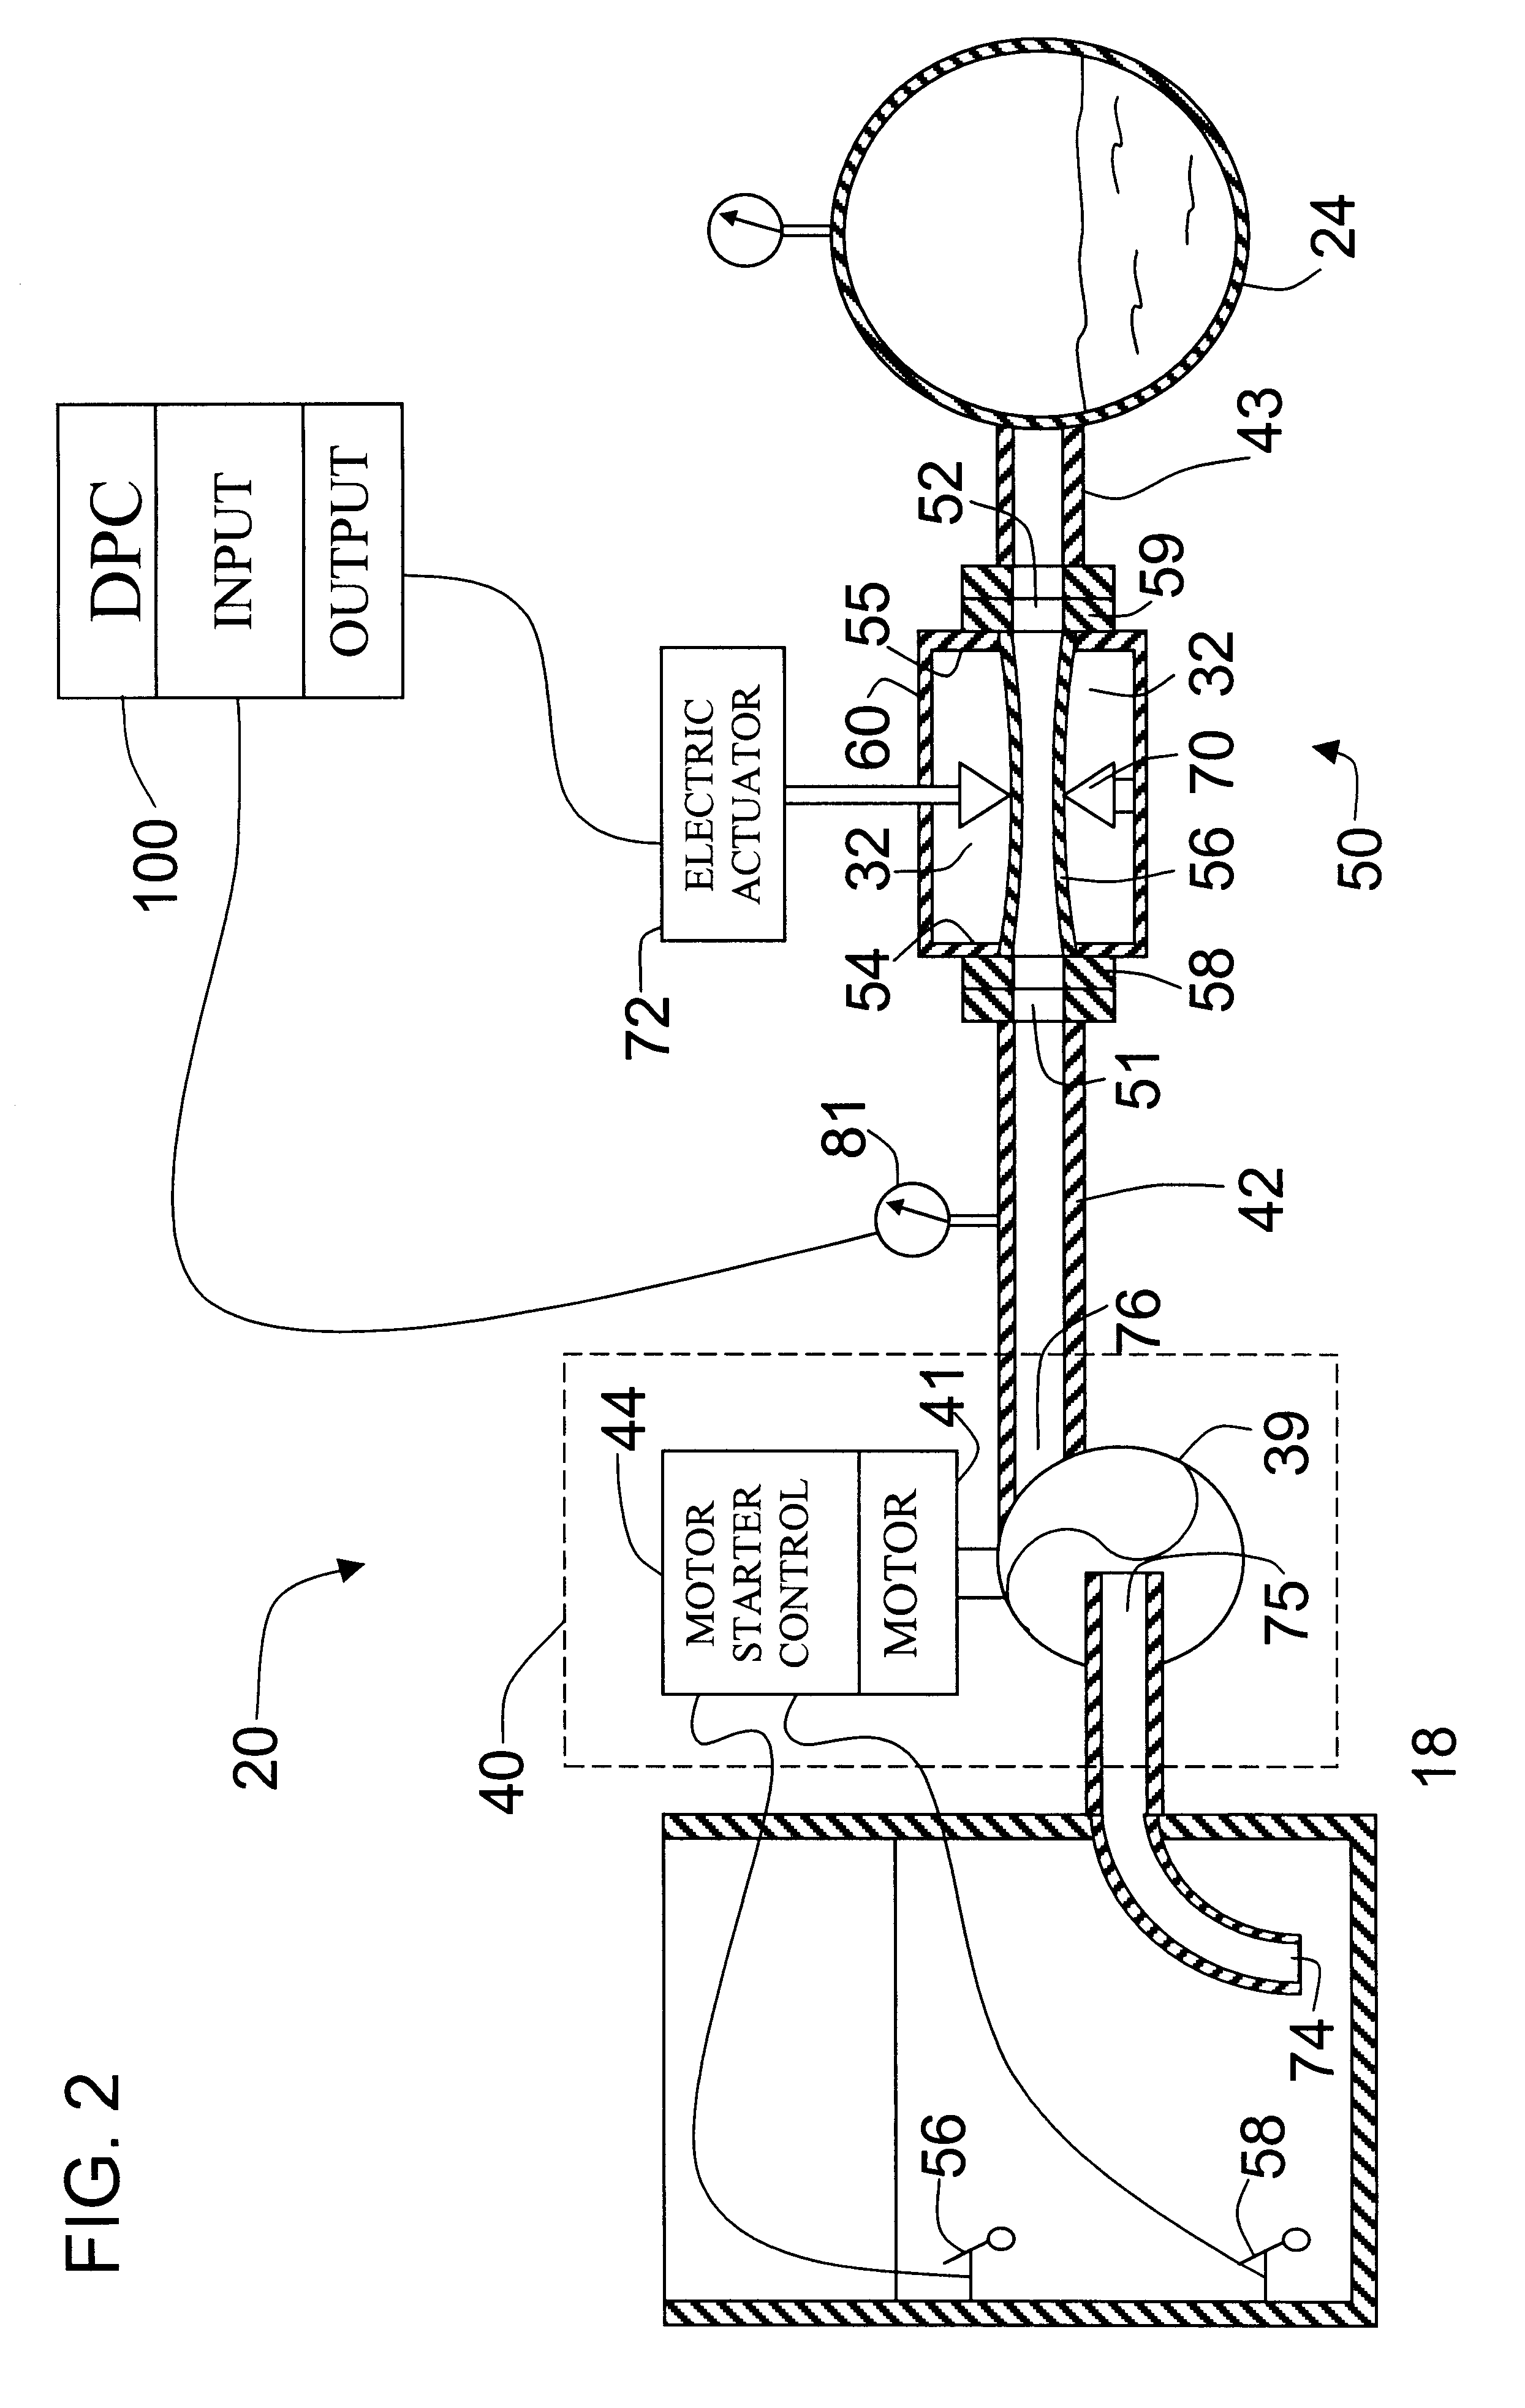 Wastewater flow control system